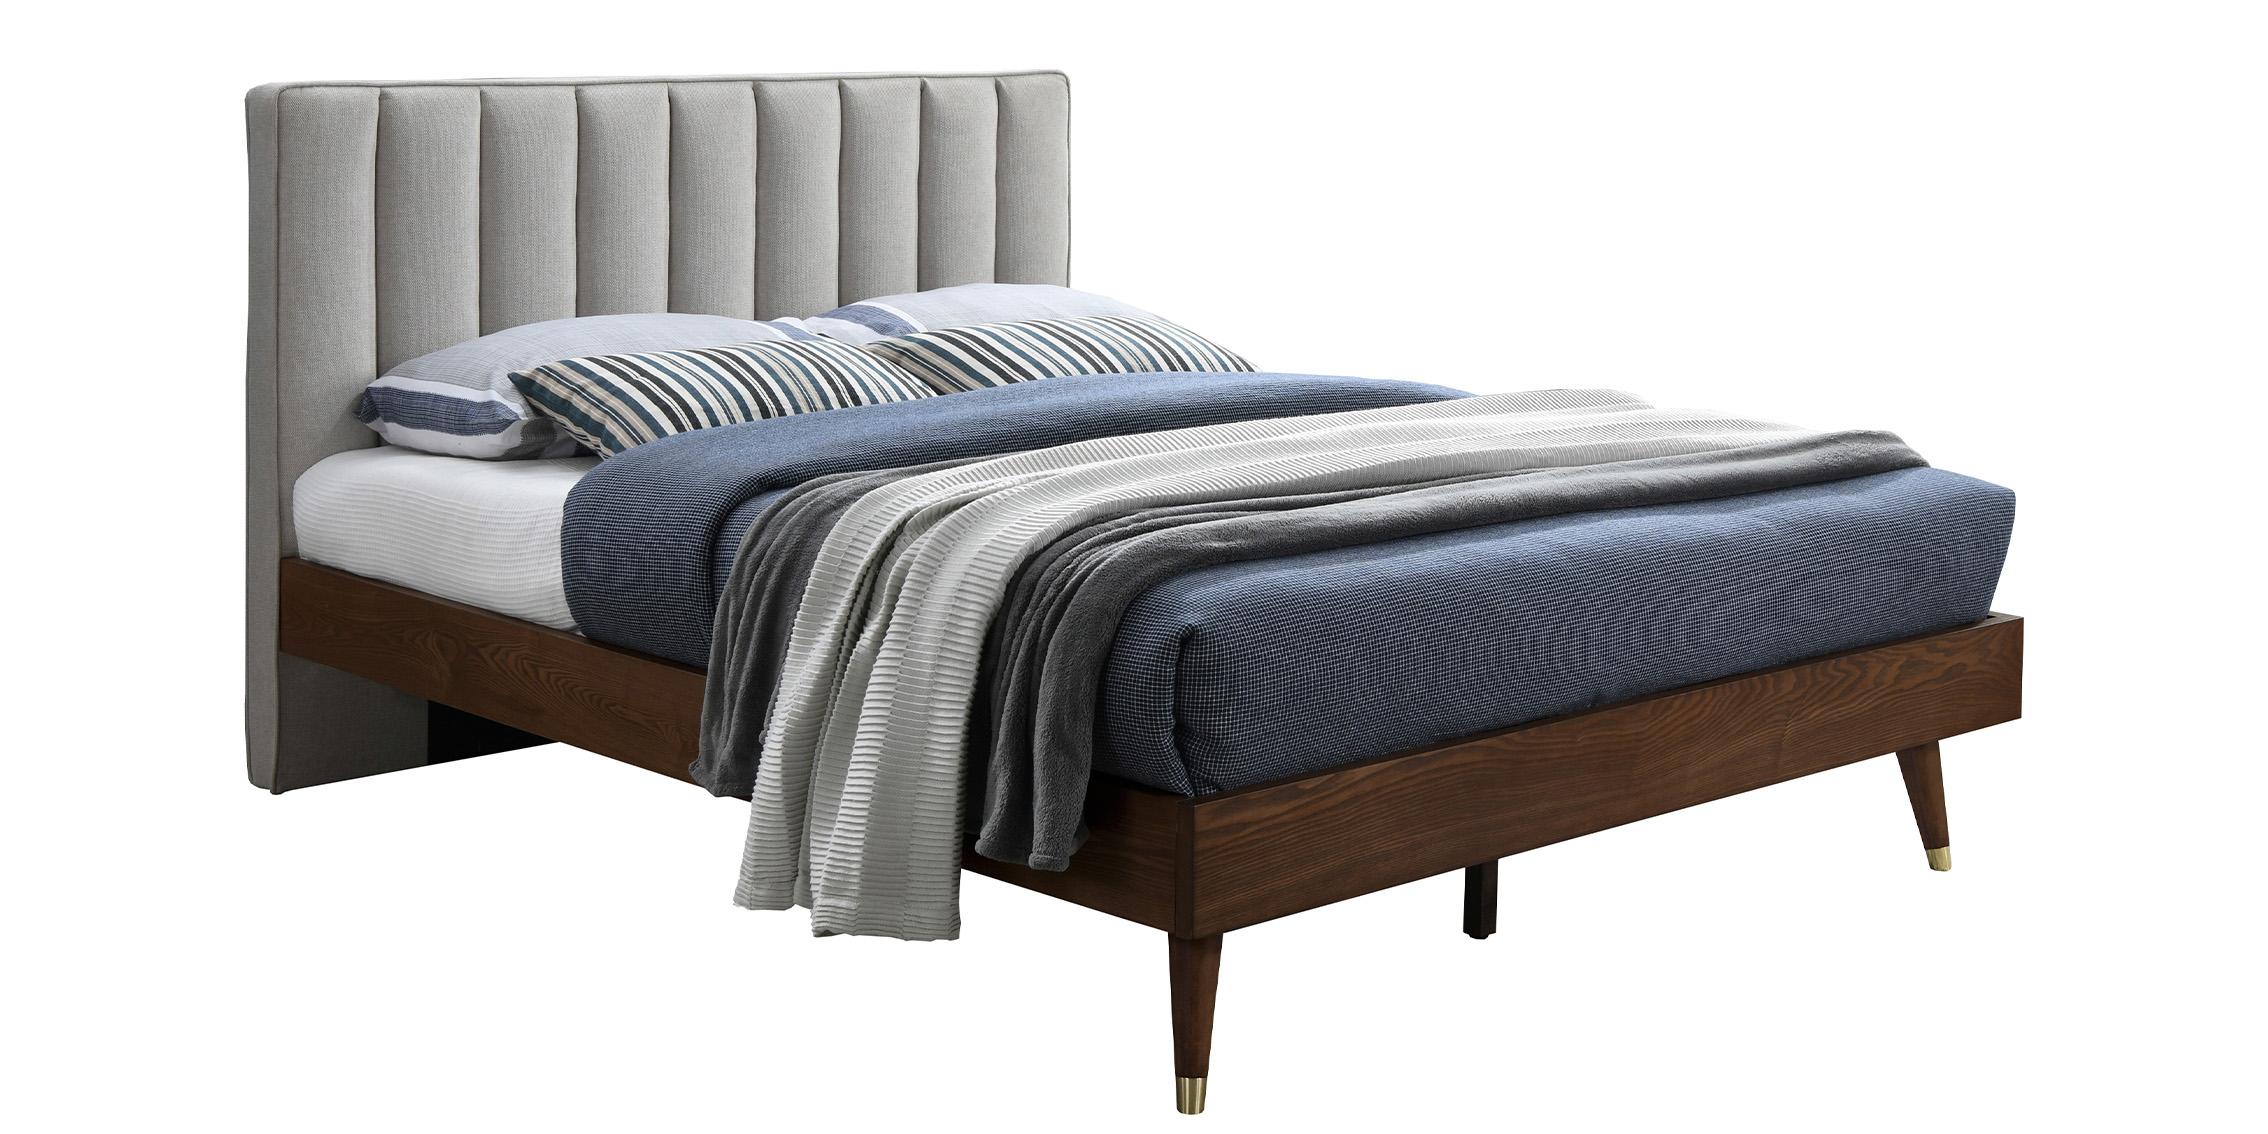 

    
Beige Linen Fabric Channel Tufted Queen Bed VANCE Meridian Contemporary Modern
